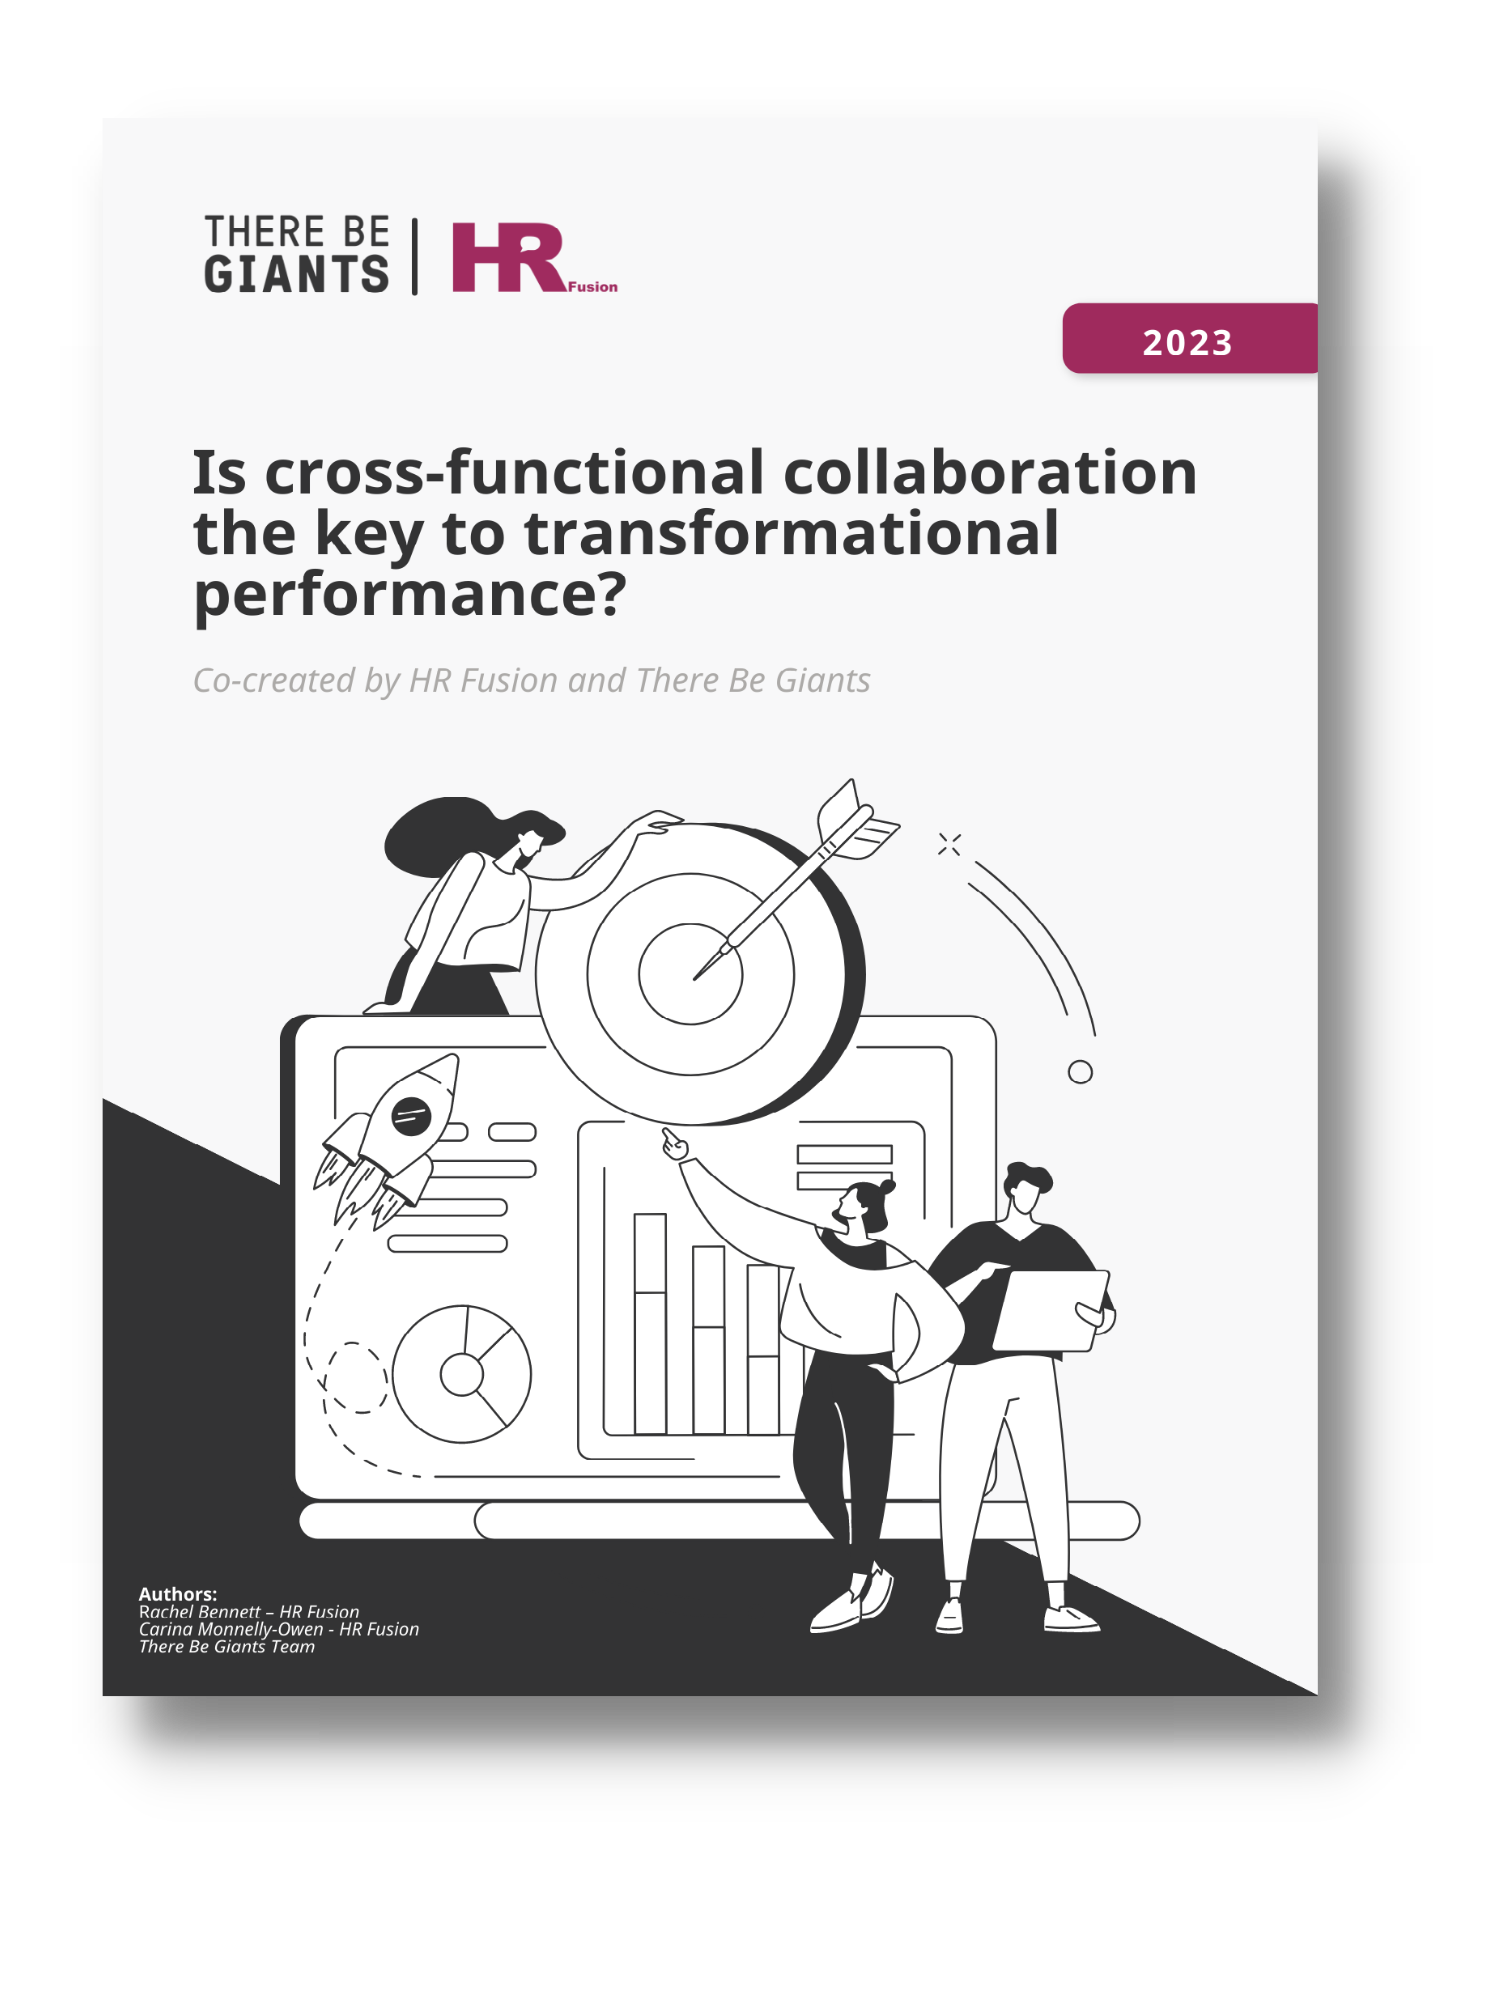 Whitepaper - Is cross-functional collaboration the key to transformational performance TBG + HRF (1)